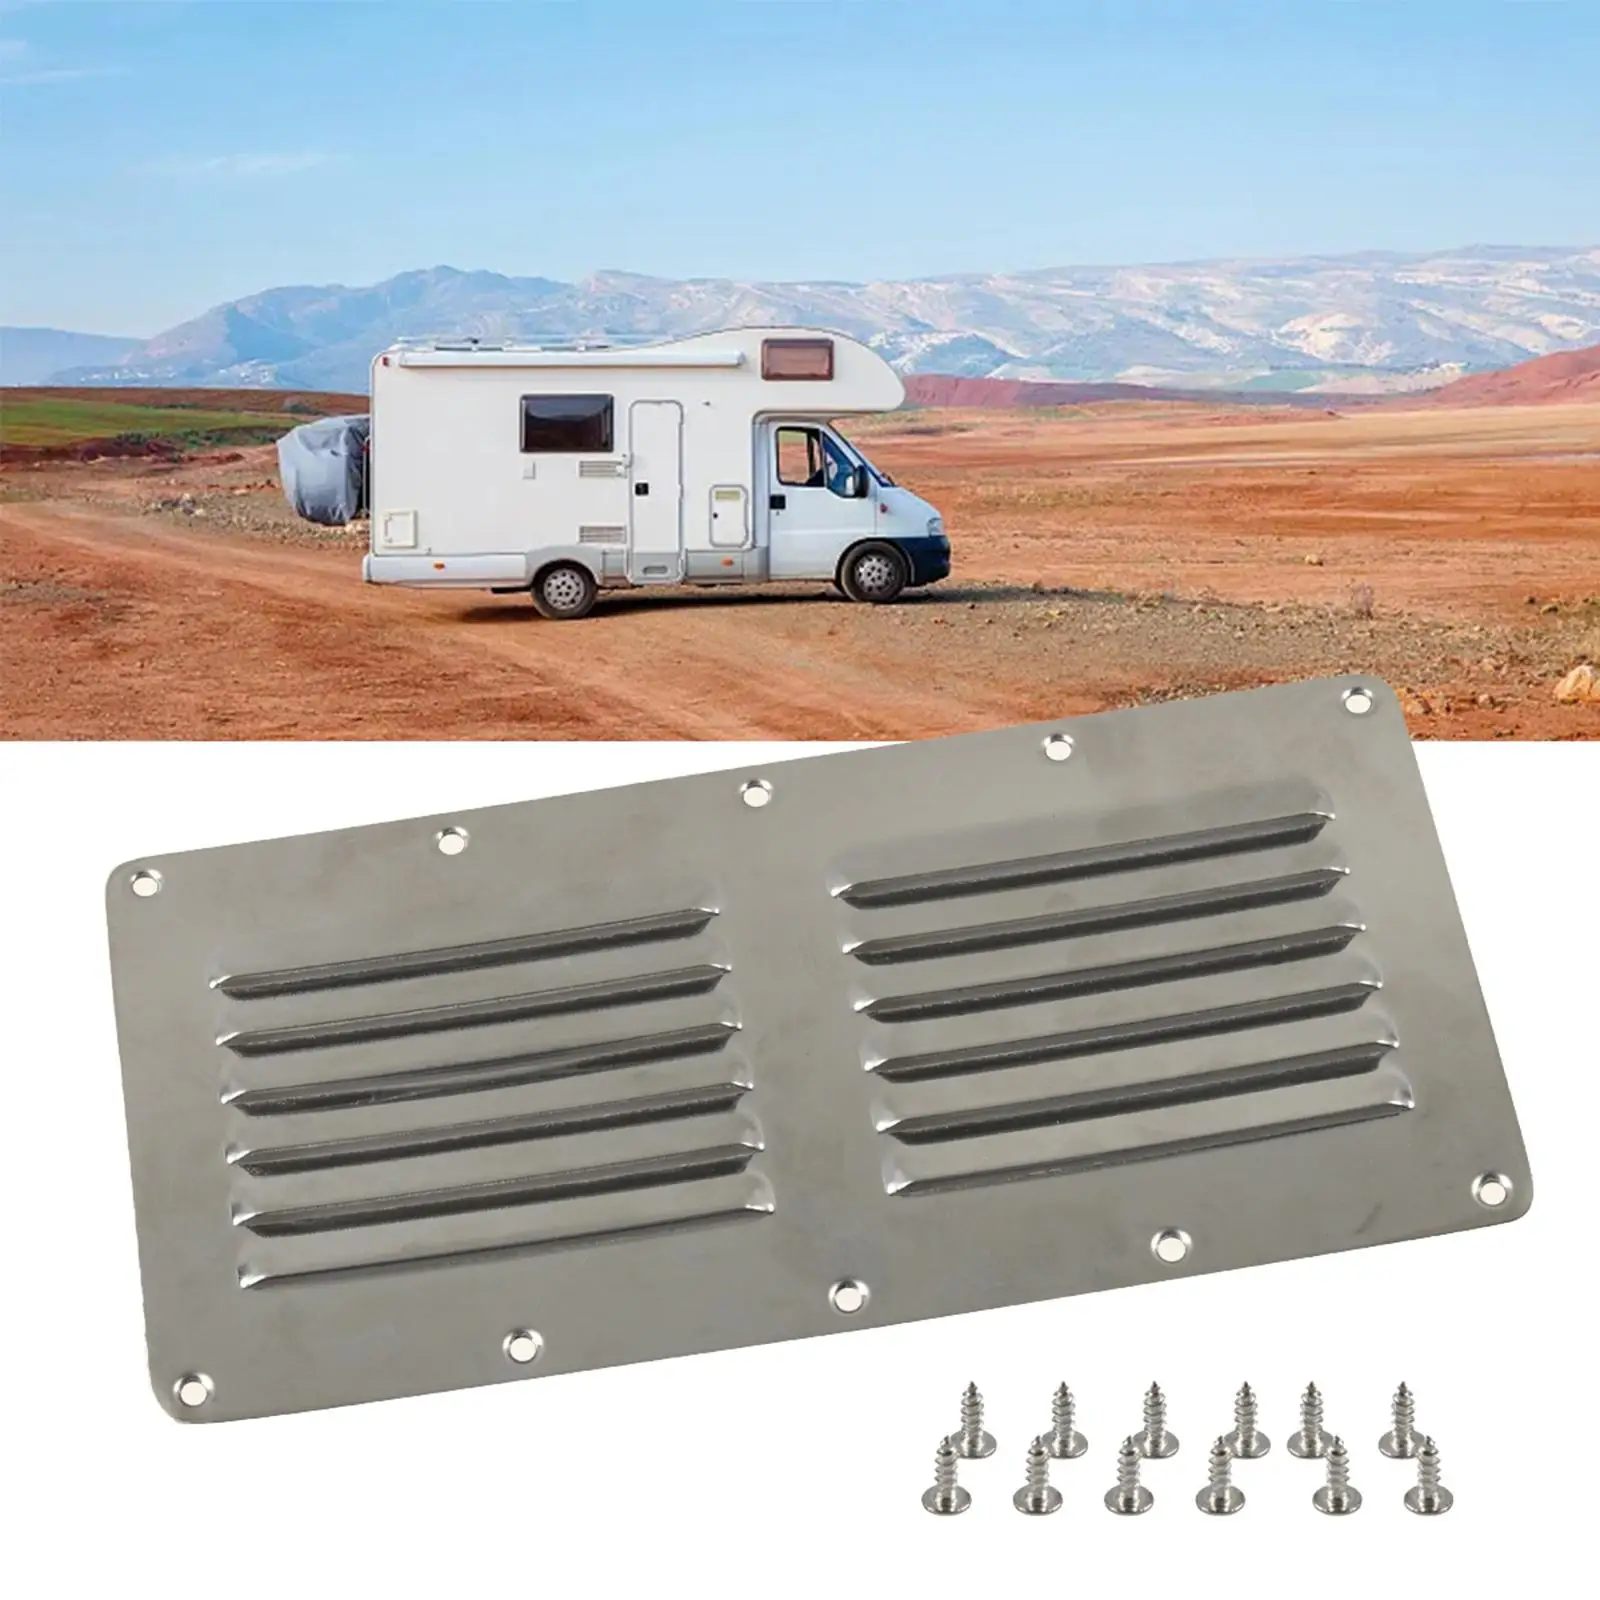 Marine Marine Vent Attachment Stainless Steel for Air Grill Boat Caravan